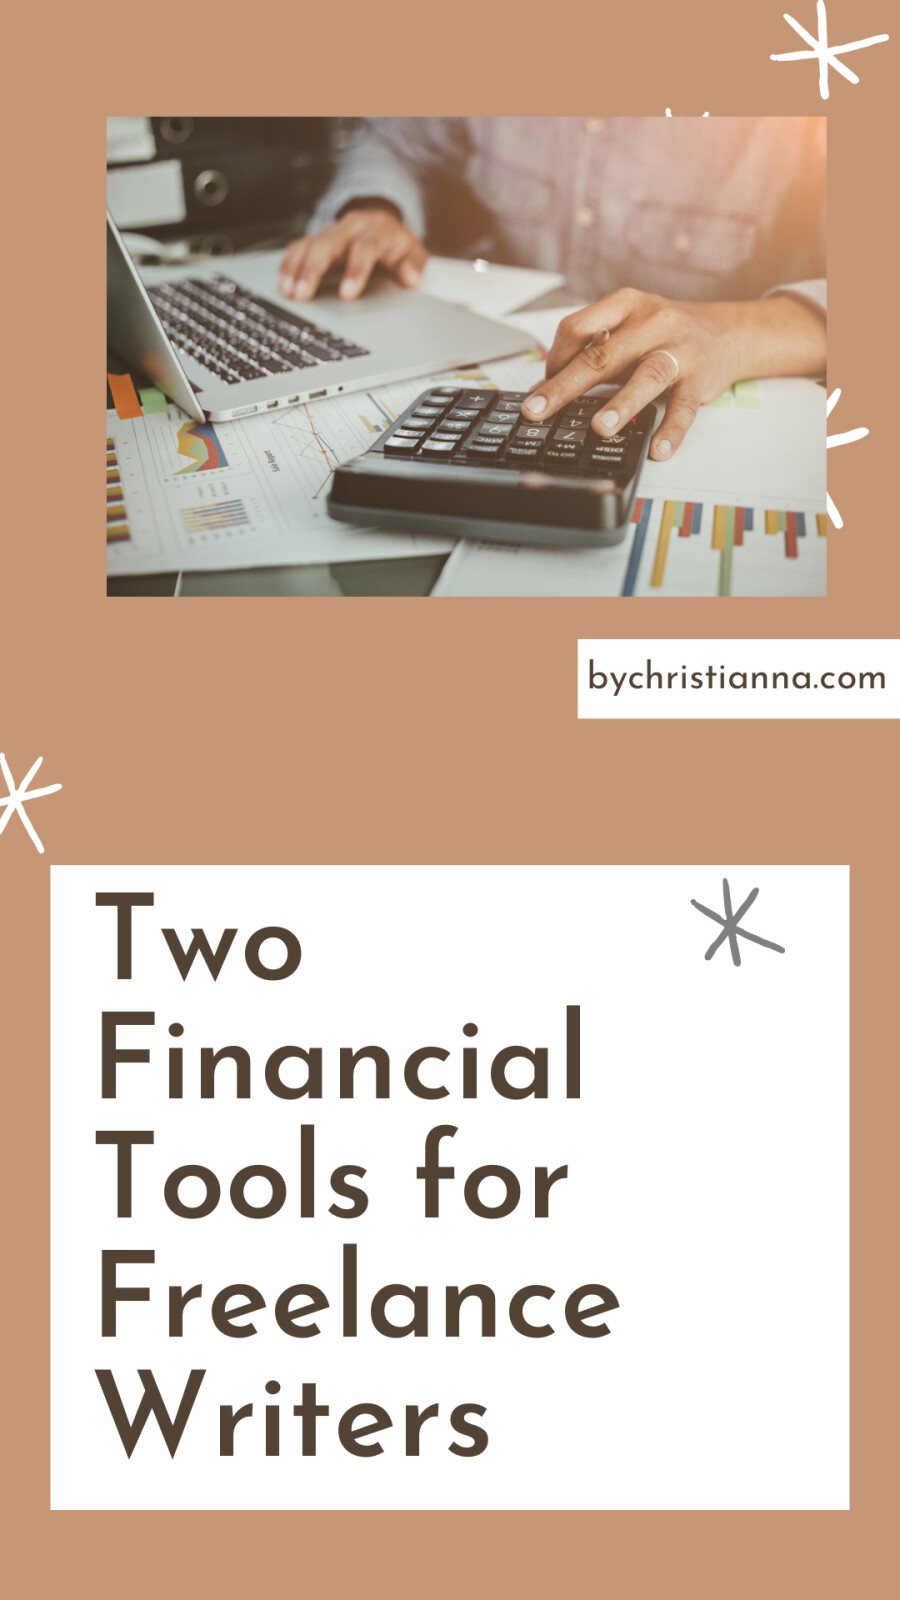 Two Financial Tools for Freelance Writers